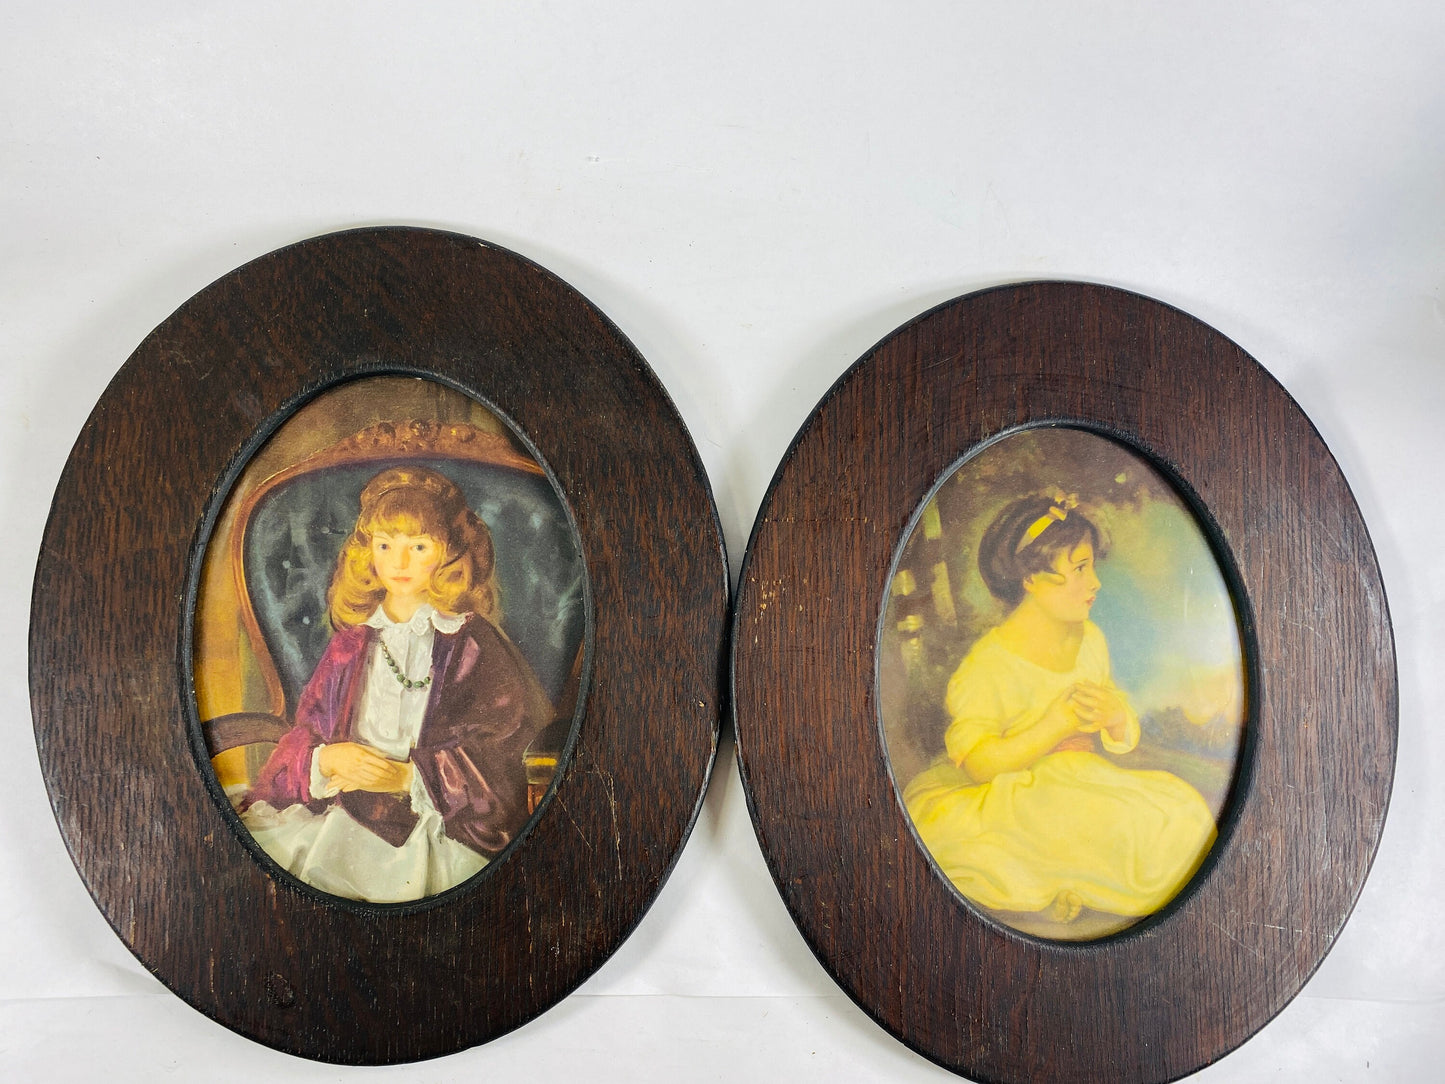 Gothic vintage wood framed haunting portraits circa 1960 with images of young girls of Victorian era home decor display. VC Andrews art